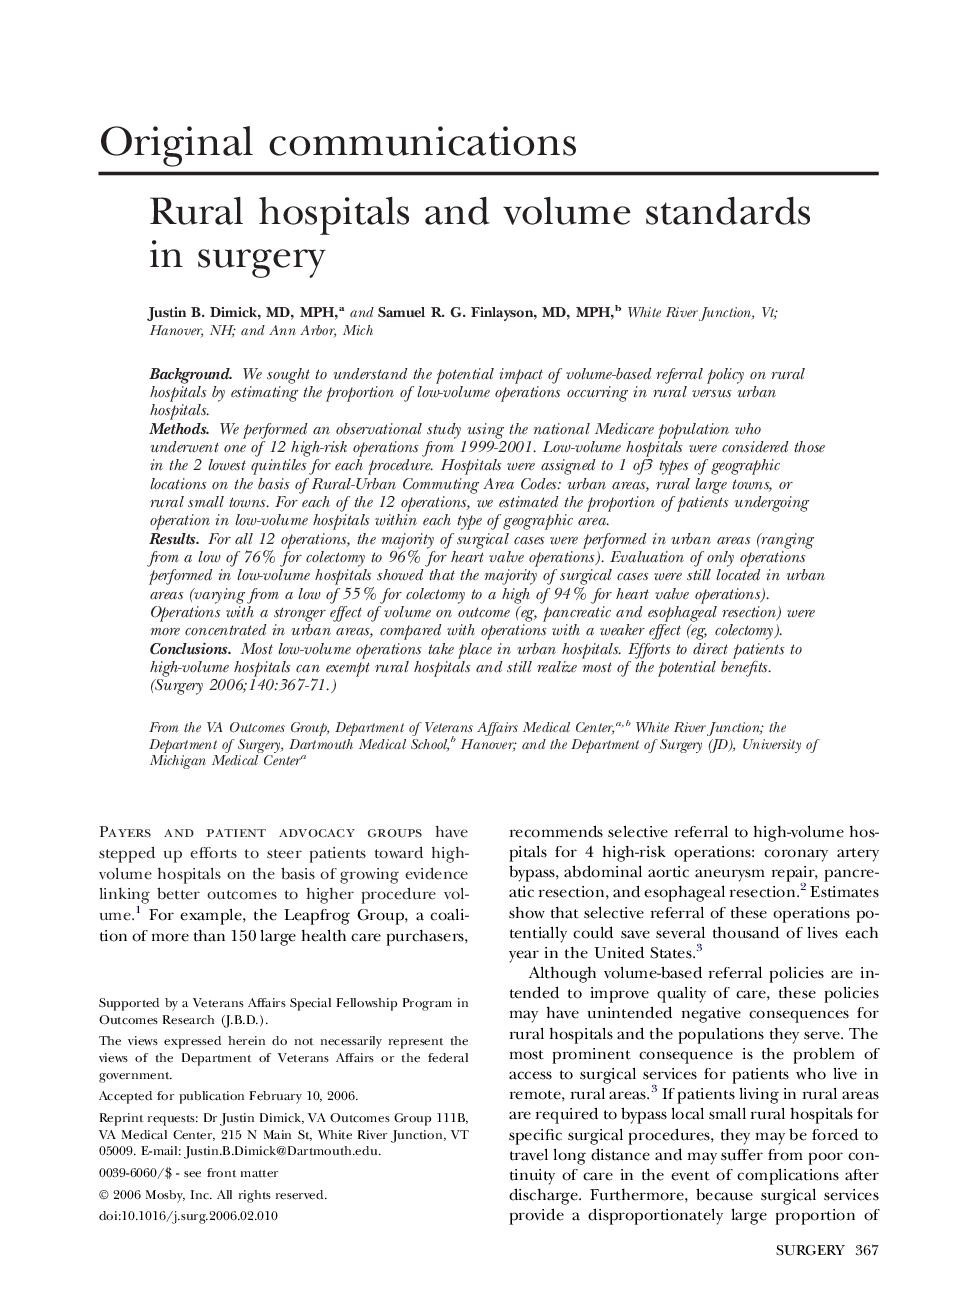 Rural hospitals and volume standards in surgery 